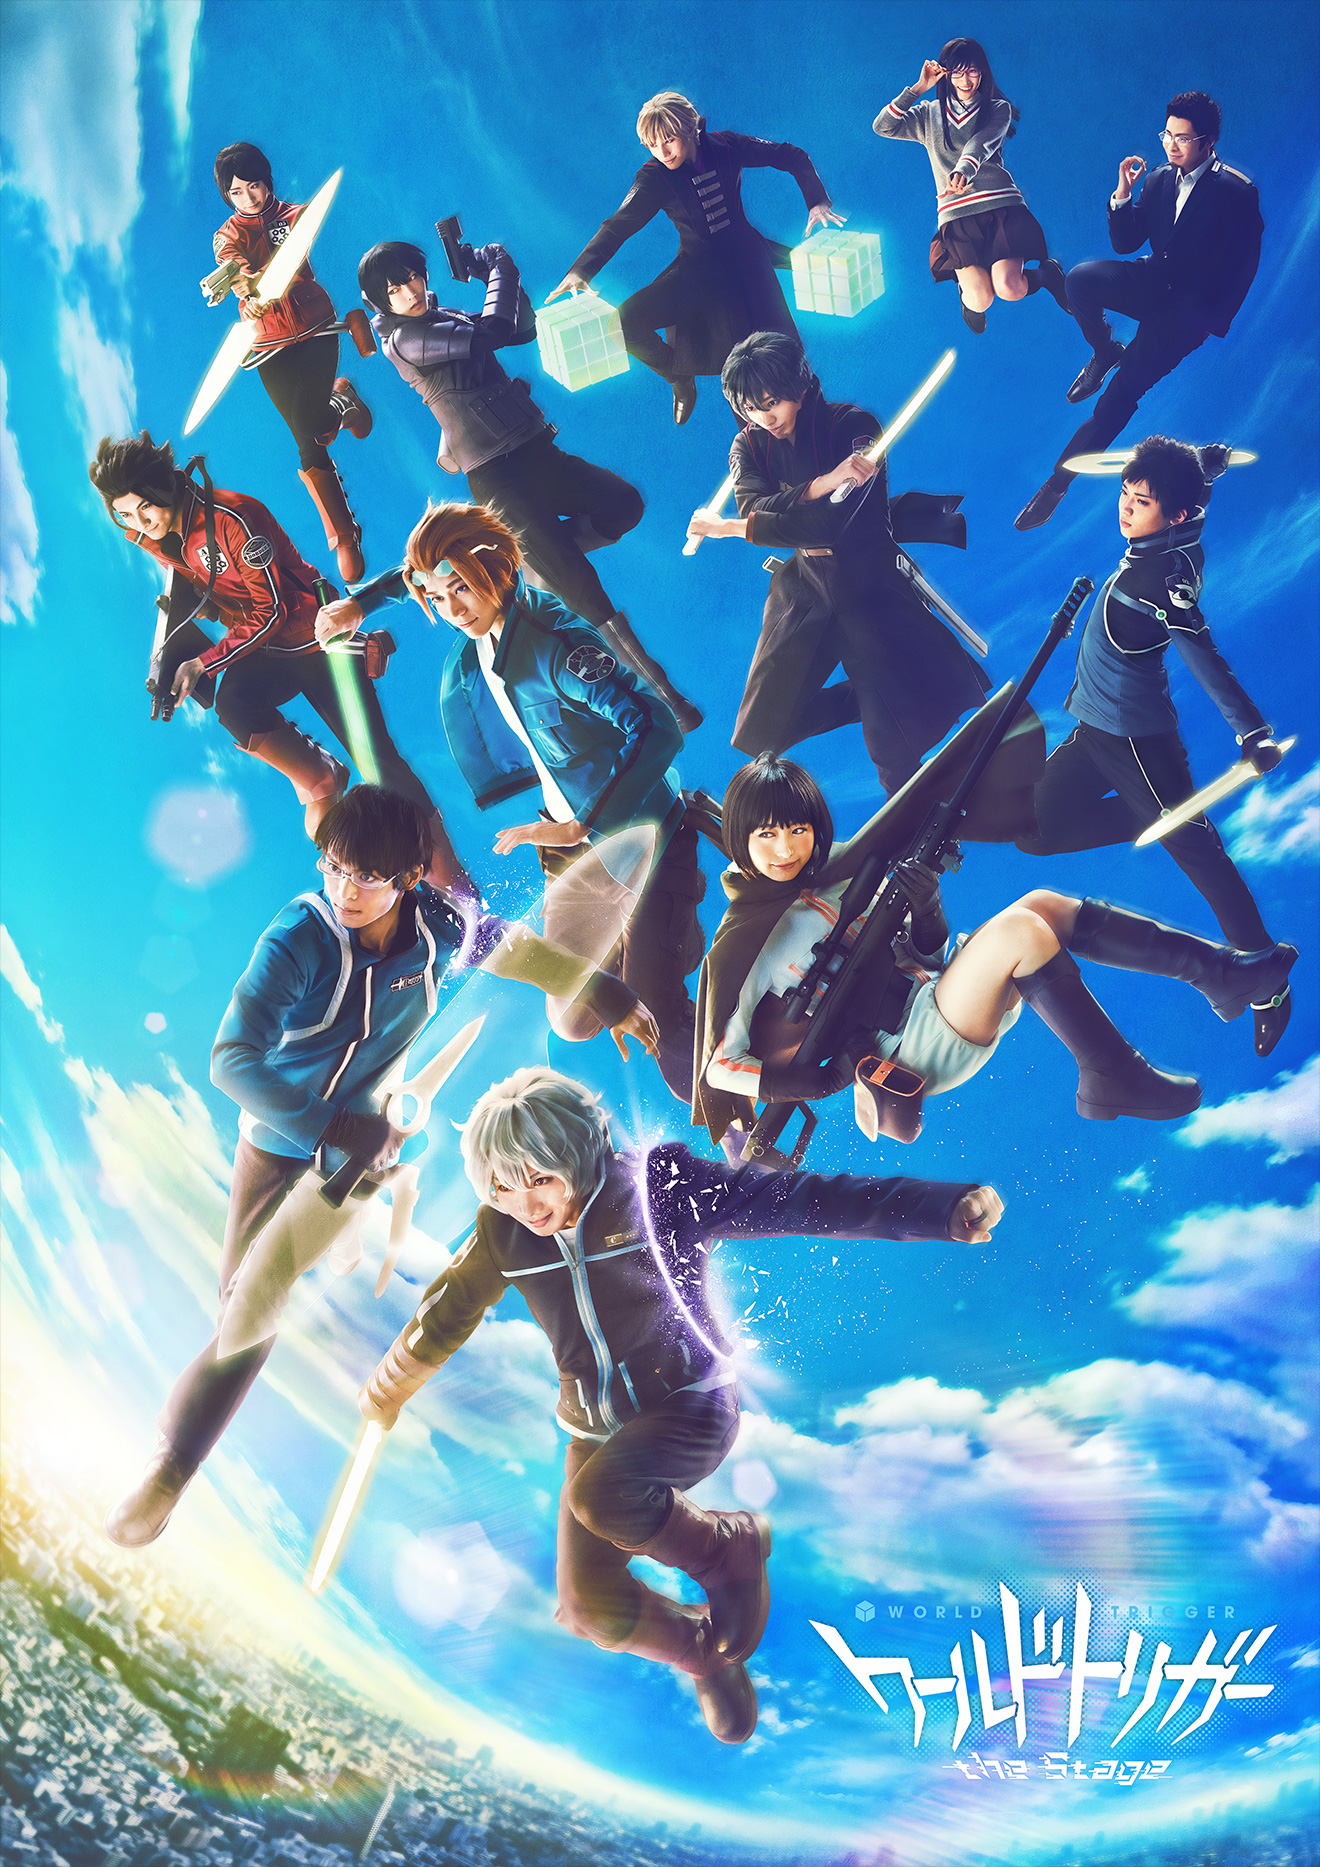 World Trigger Stage Play Releases Large-Scale Invasion Arc Key Visual